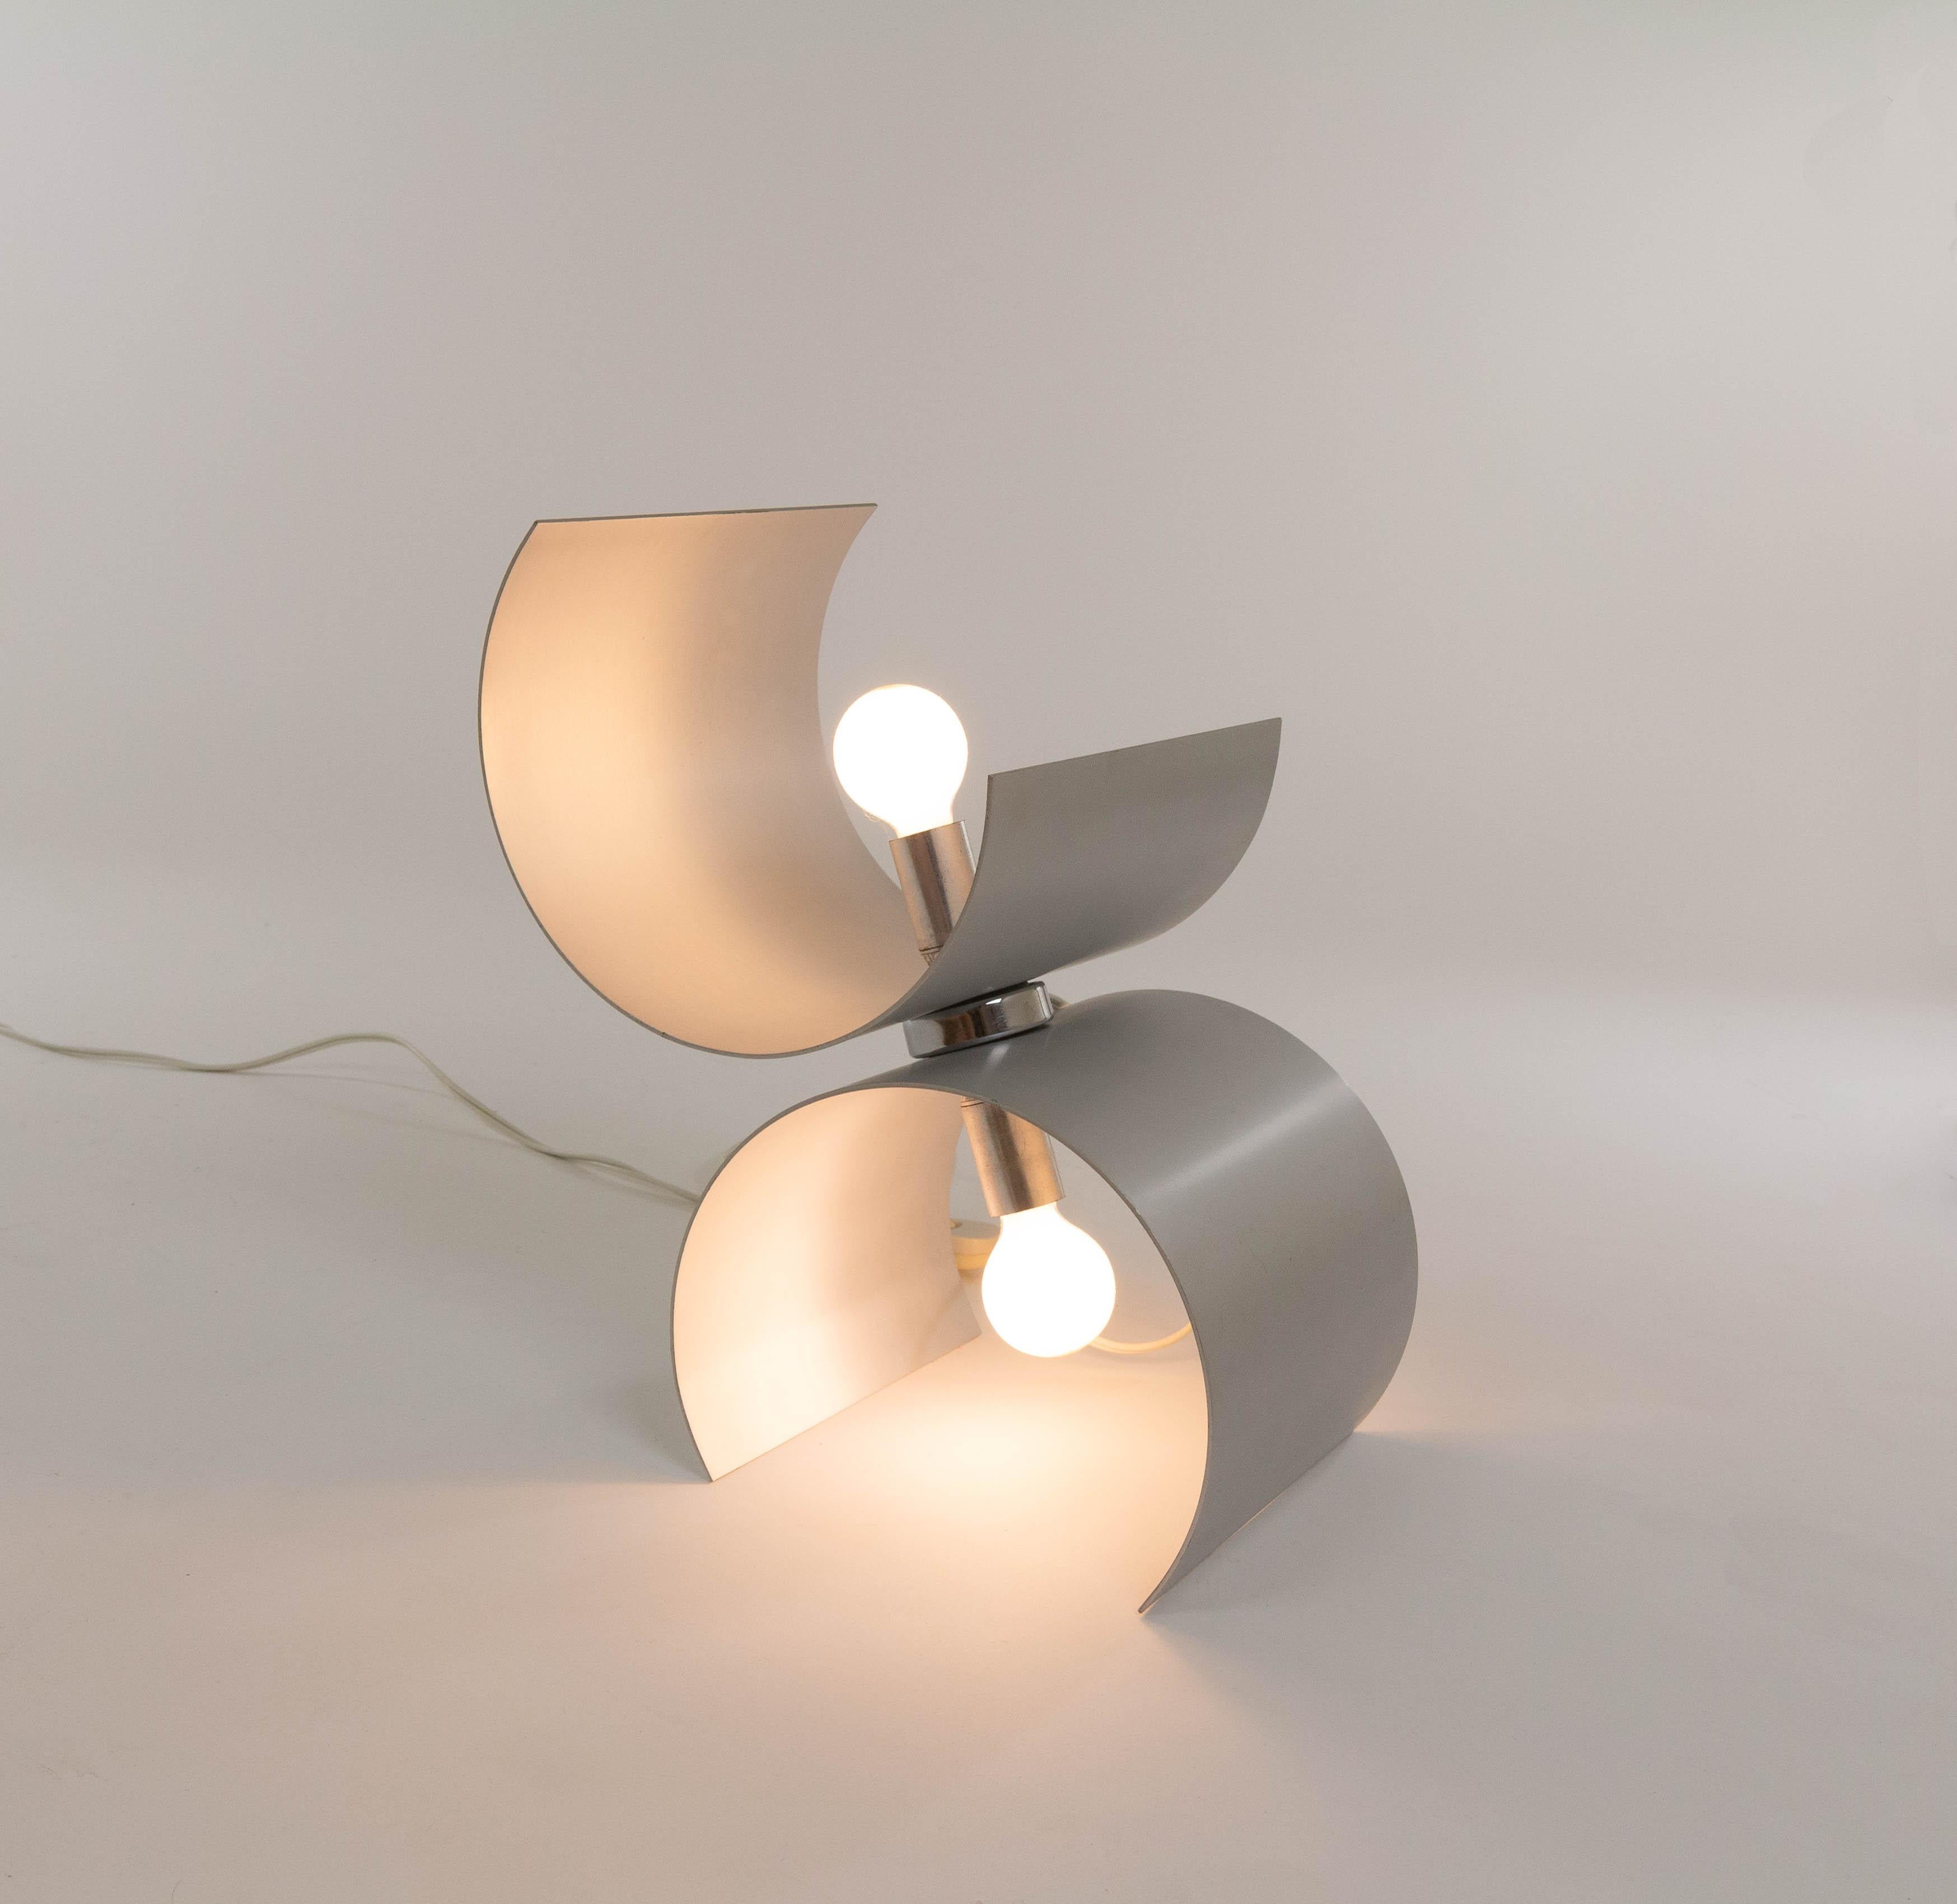 Table lamp produced by Nucleo Sormani in the 1970s.

The lamp consists of two curved aluminum parts, both containing a light bulb fitting (E14). The two parts are joined together, allowing the parts to rotate. The model of the curves offers a wide